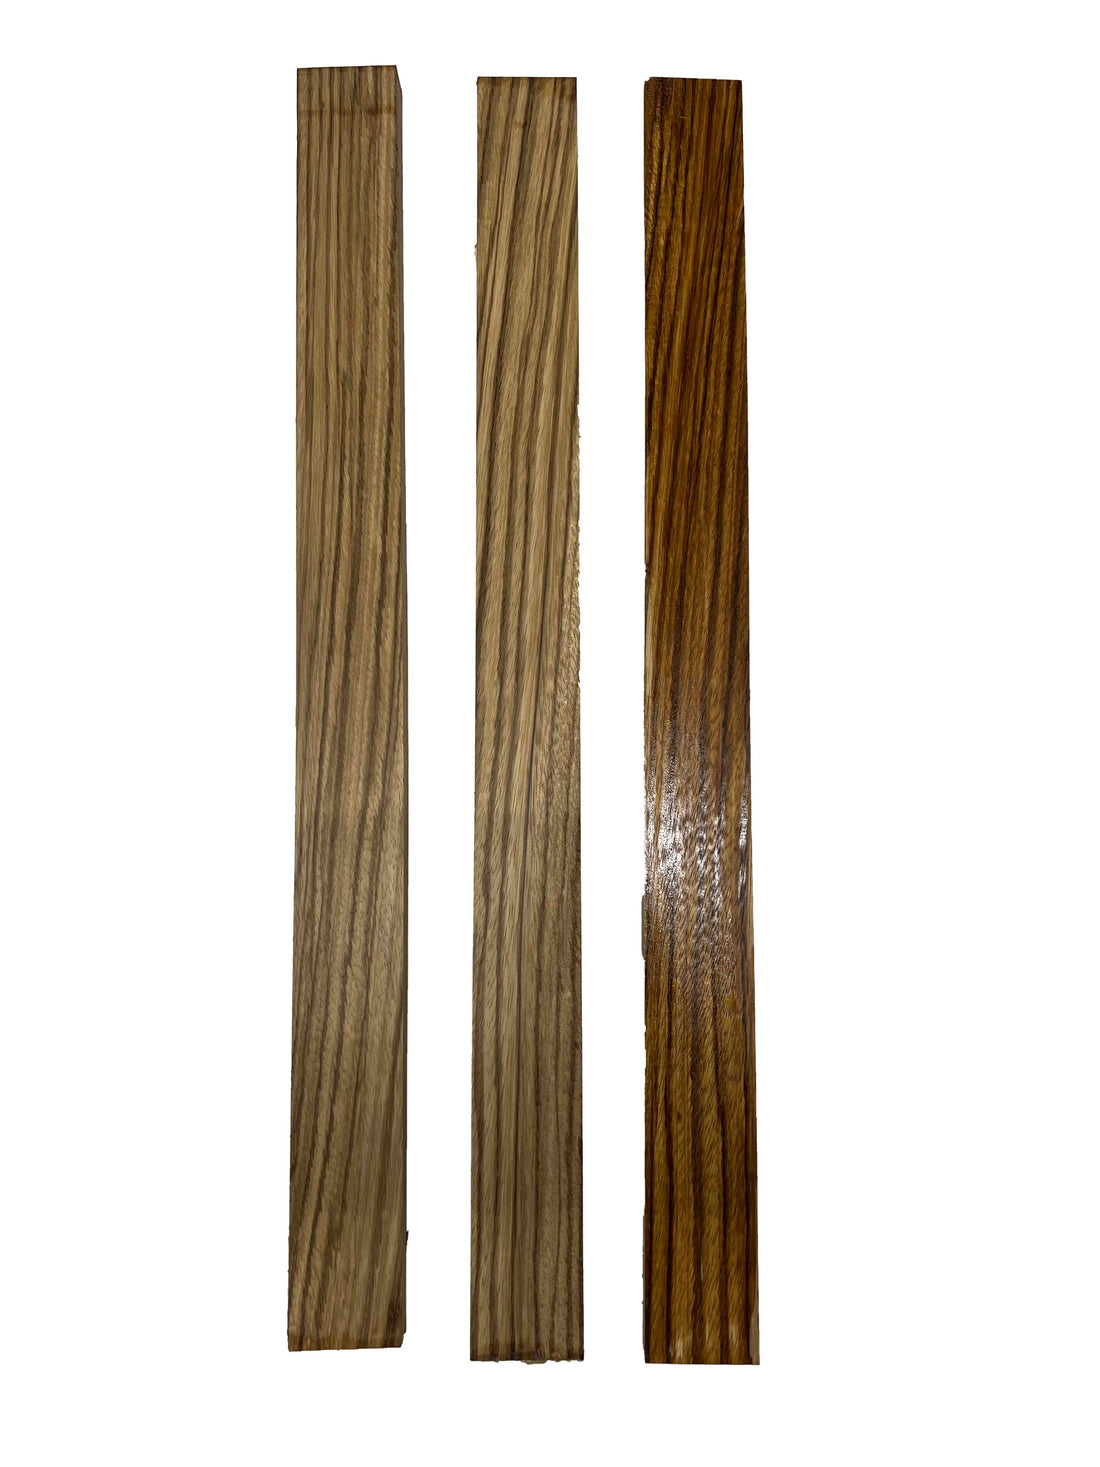 Pack Of 3, Zebrawood Thin Stock Three Dimensional Lumber Wood Blank 24&quot;x2&quot;x3/4&quot; 